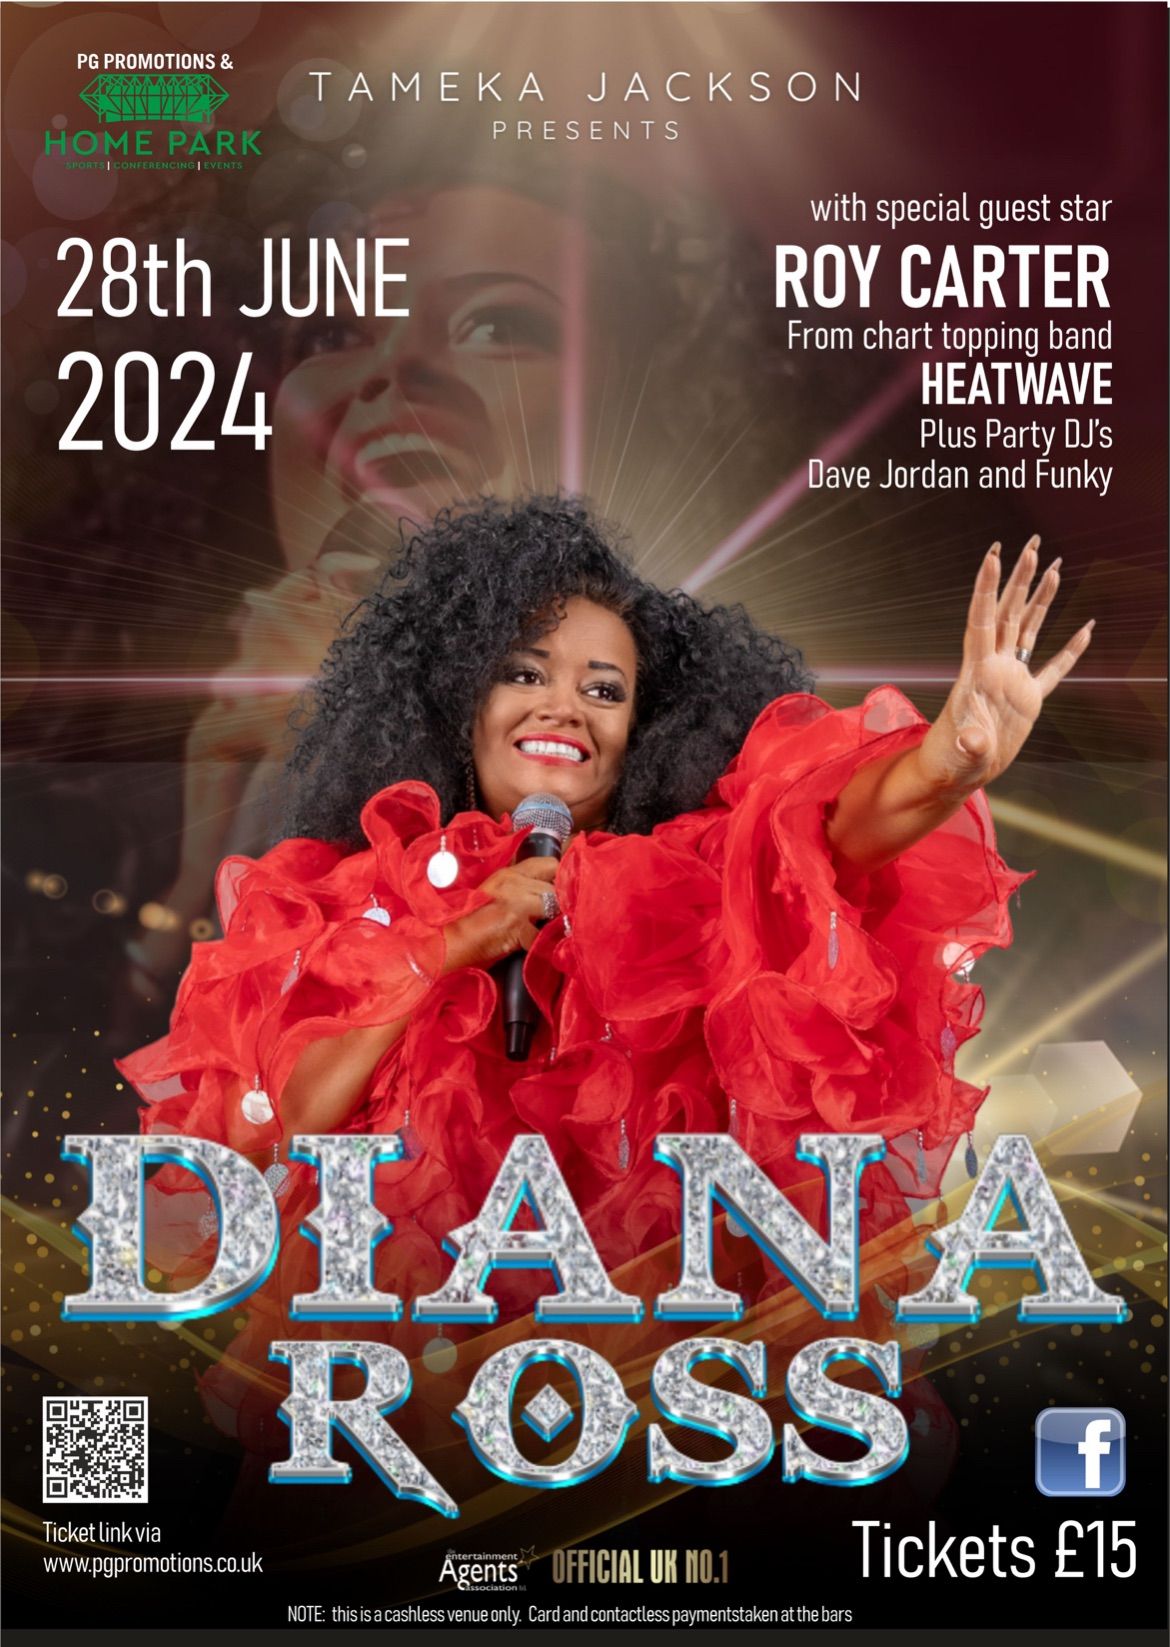 DIANA ROSS tribute with Guest Star Roy Carter from Chart topping band Heatwave 